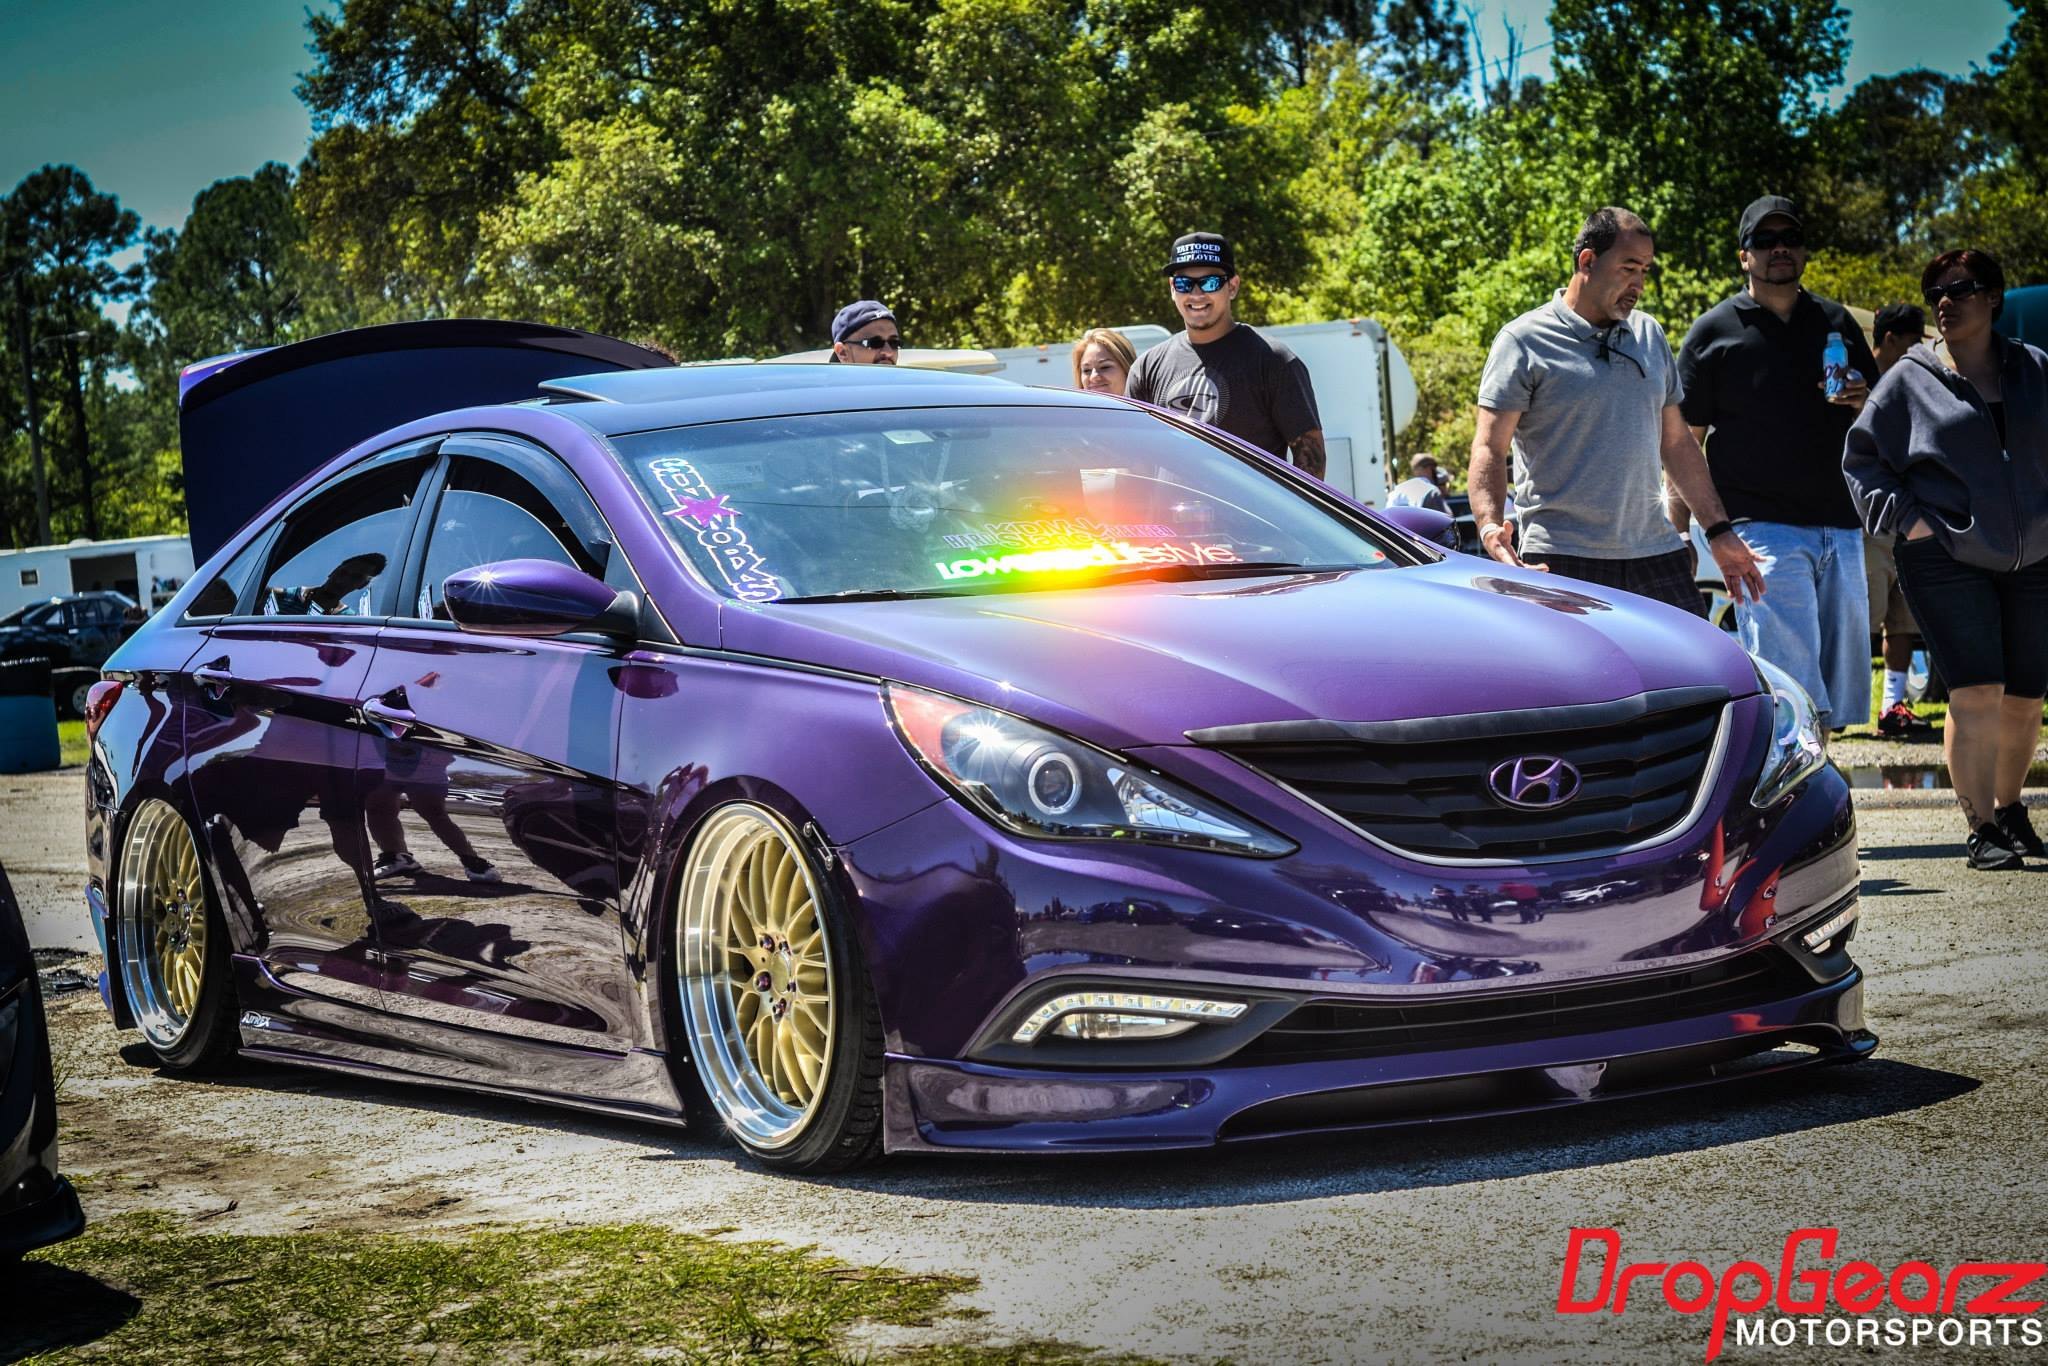 Slammed Hyundai Sonata With a Full Body Kit and Air Suspension - Photo by ACE Alloy